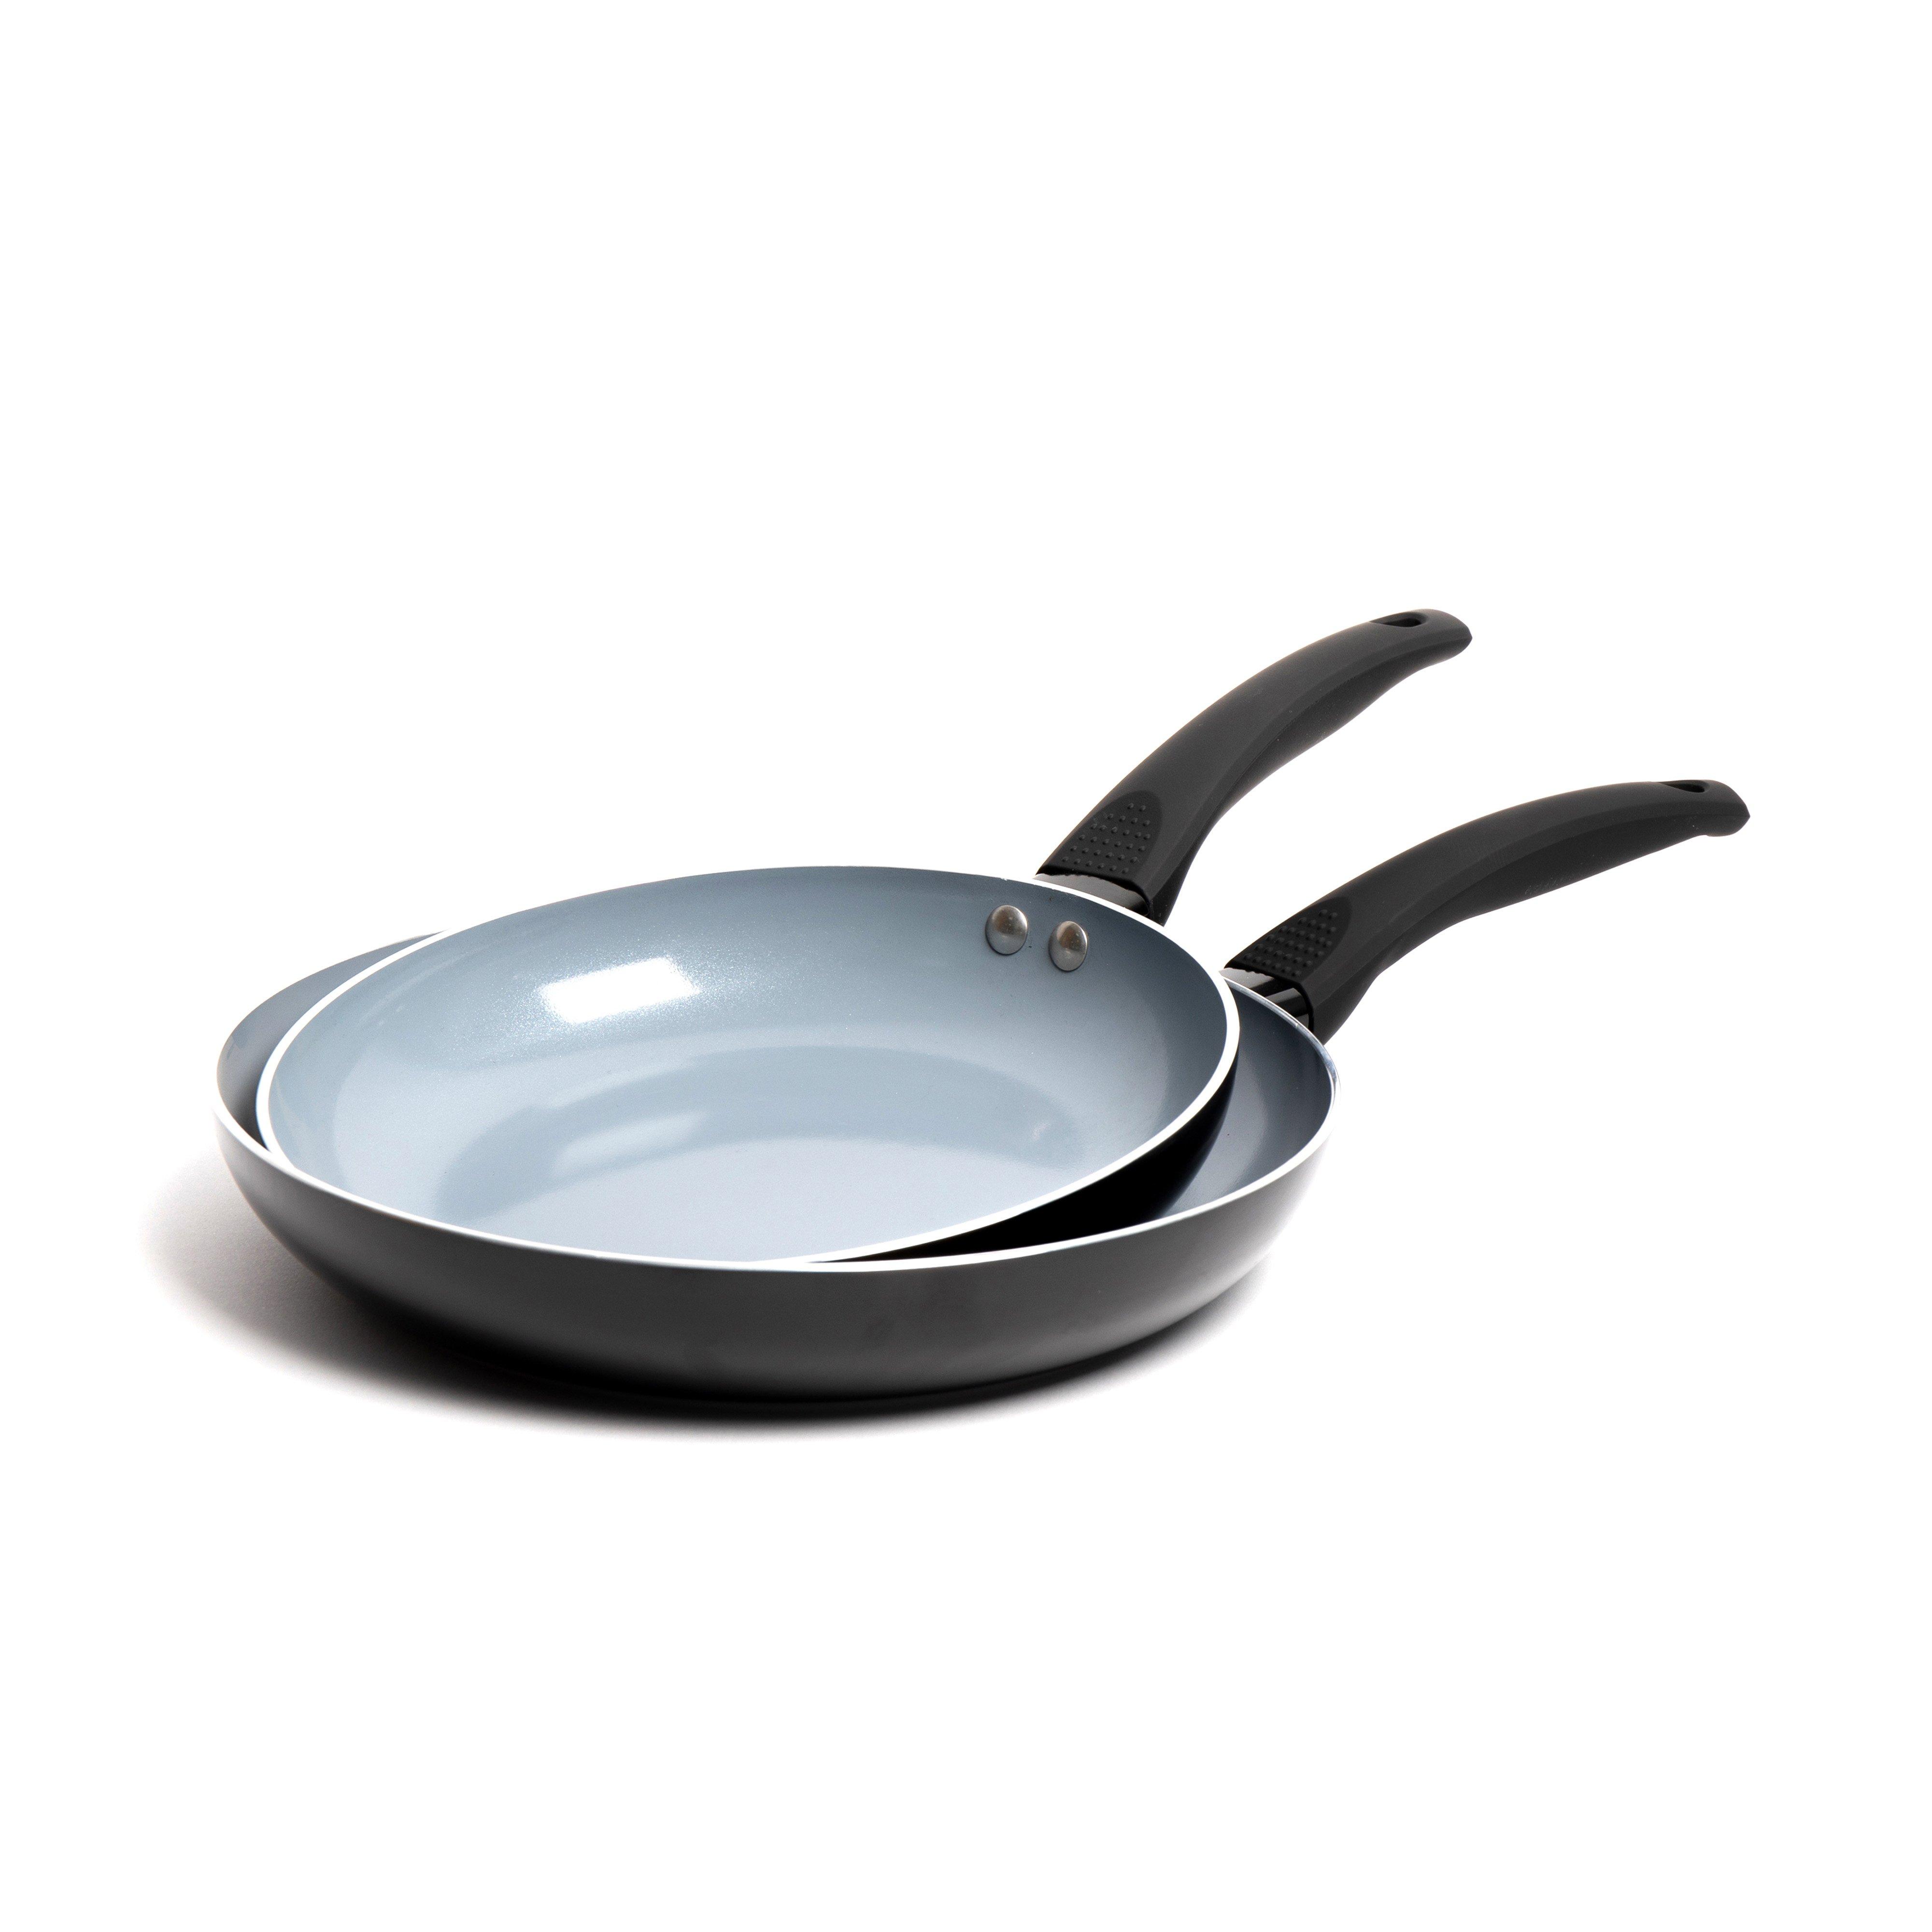 2pc Ceramic Non-Stick Eco Frying Pan Set with 2x Induction-Safe Frying Pans, 24cm and 28cm